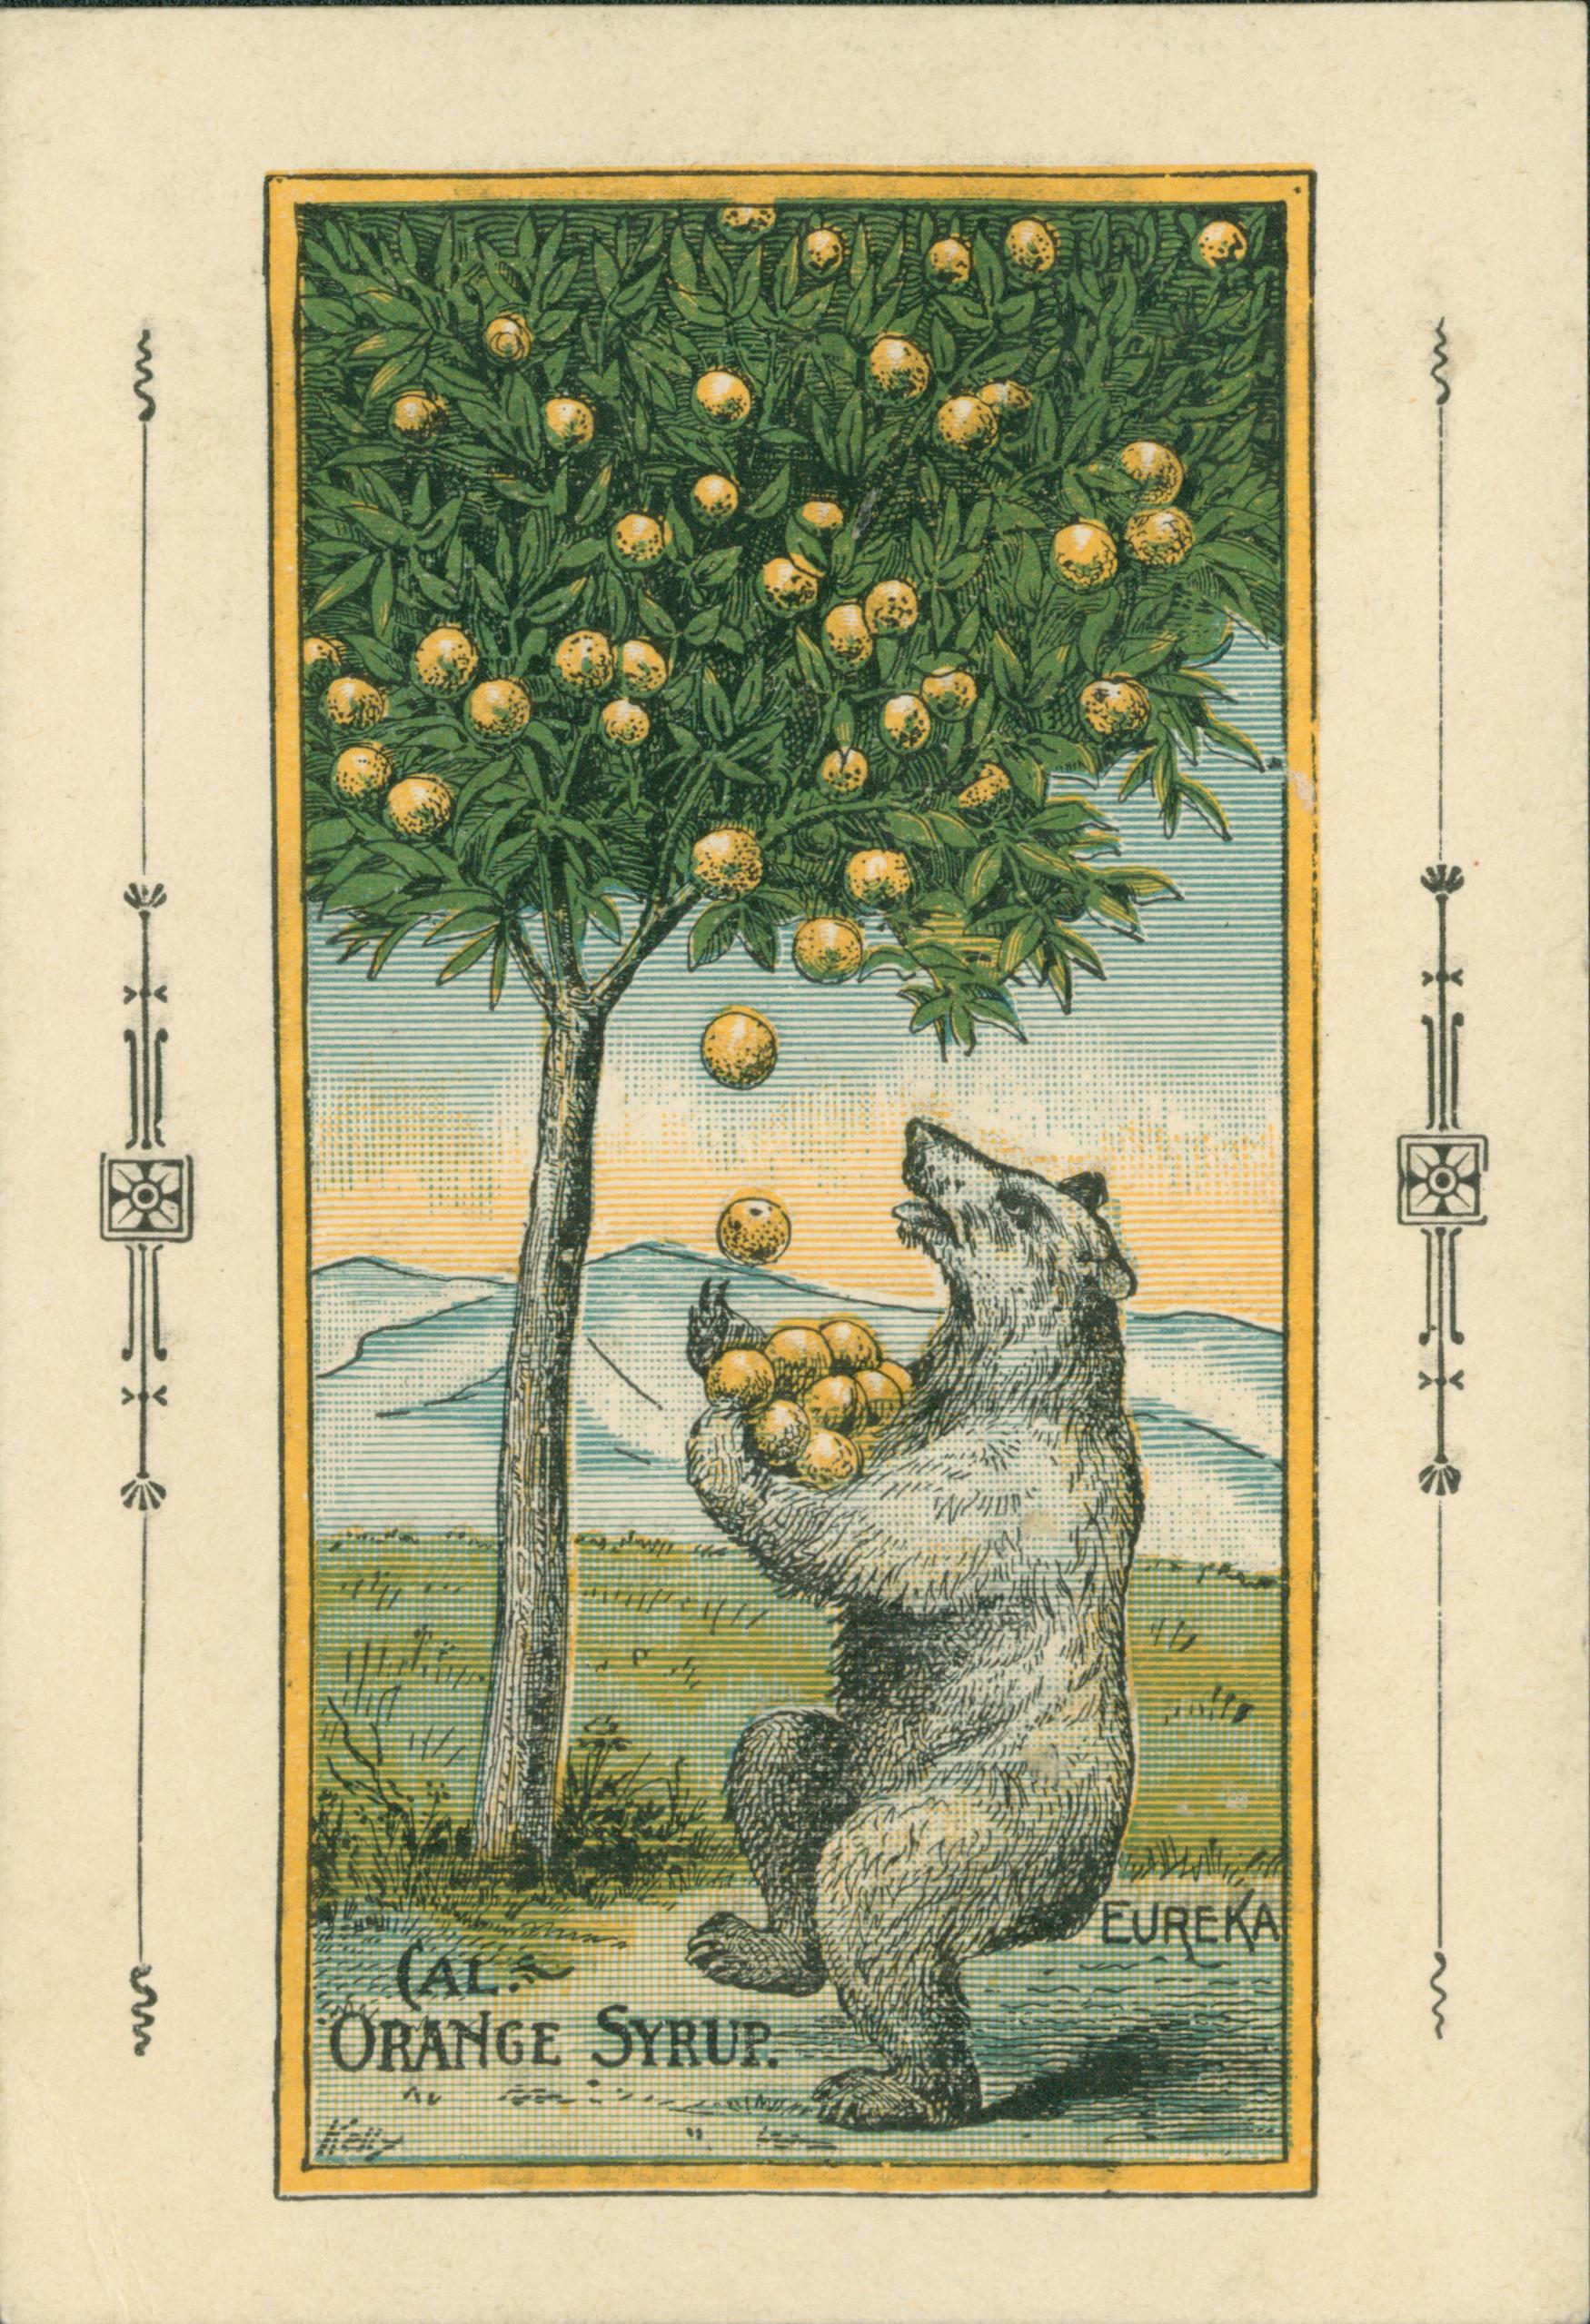 Shows a bear catching oranges falling from a tree.  Text on verso:  'Nature's best vegetable remedy for the permanent cure of ...  Manufactured by the California Medicine Co., San Francisco.'